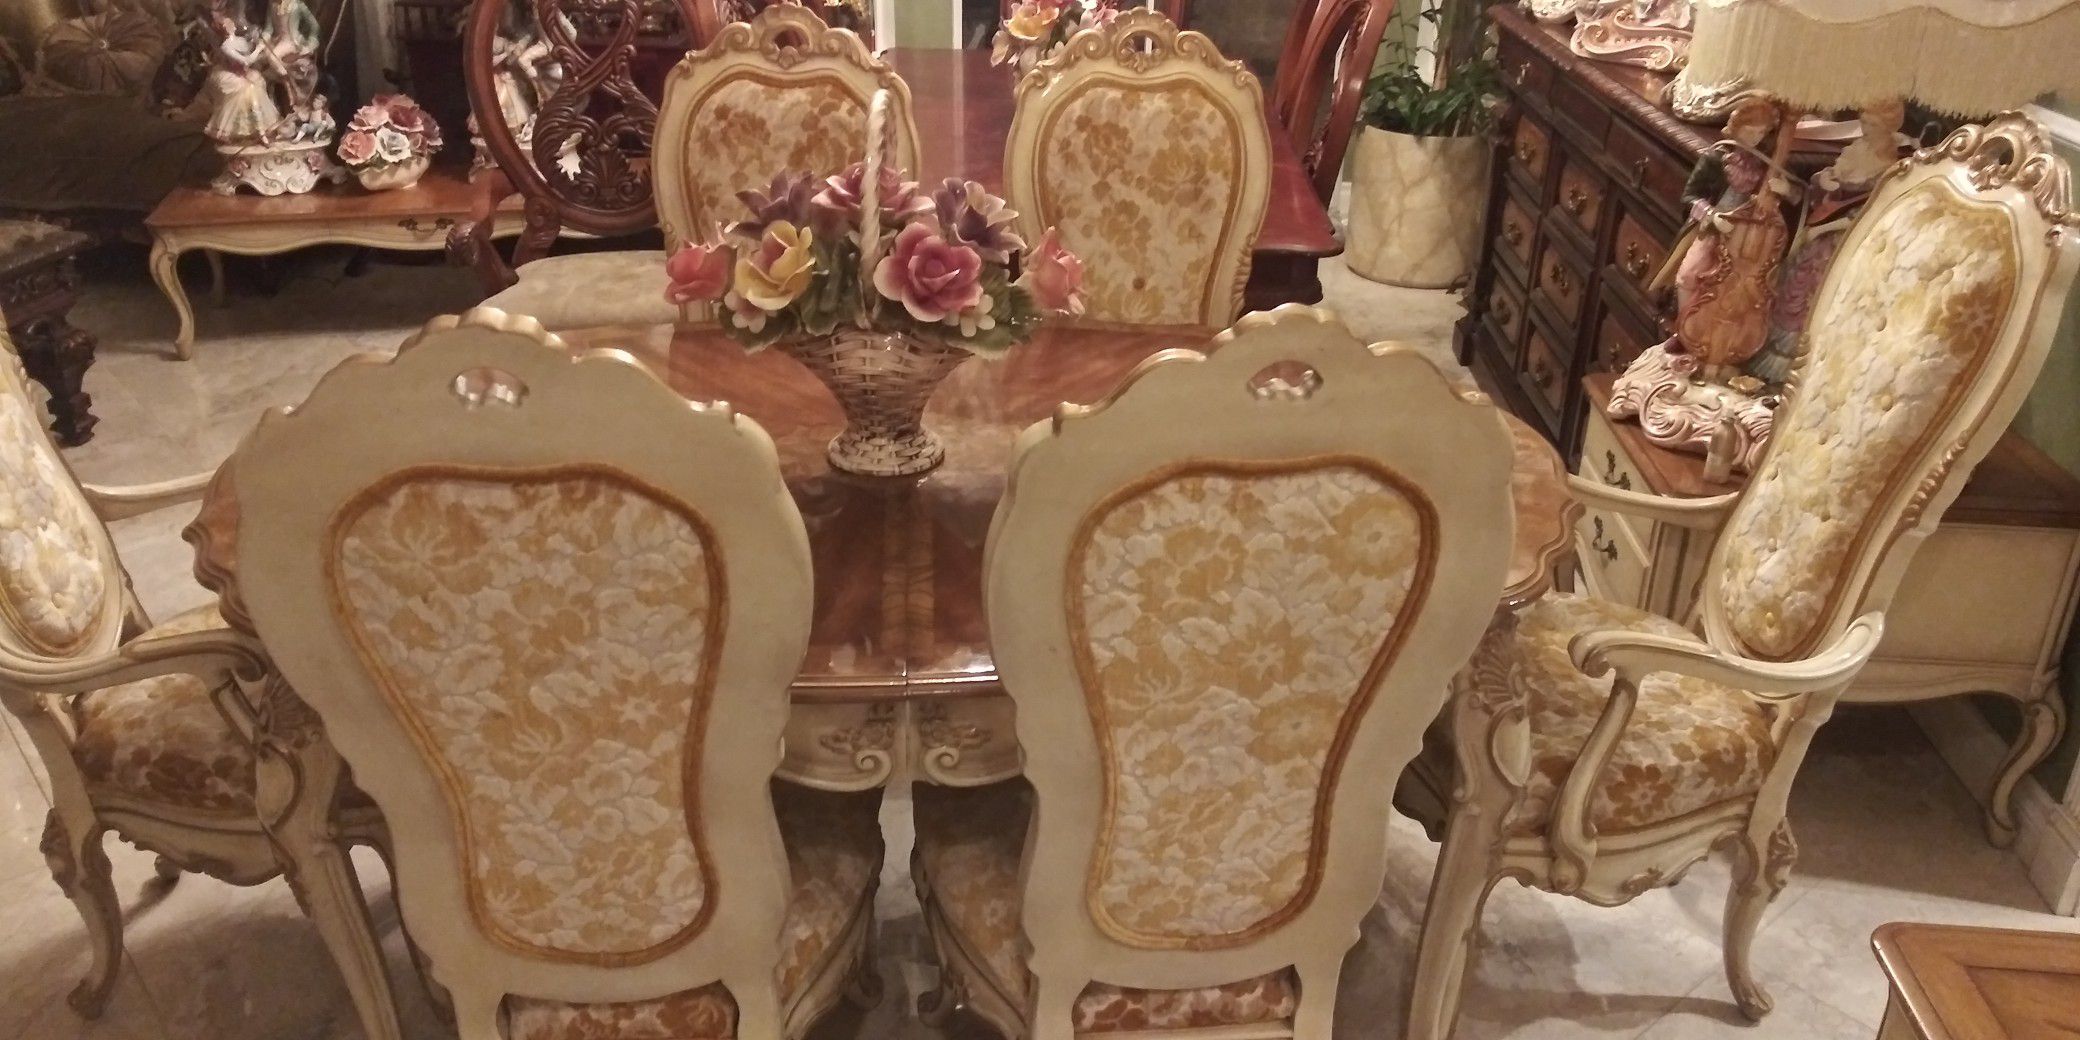 Beautiful antique dinner table with 6 chairs